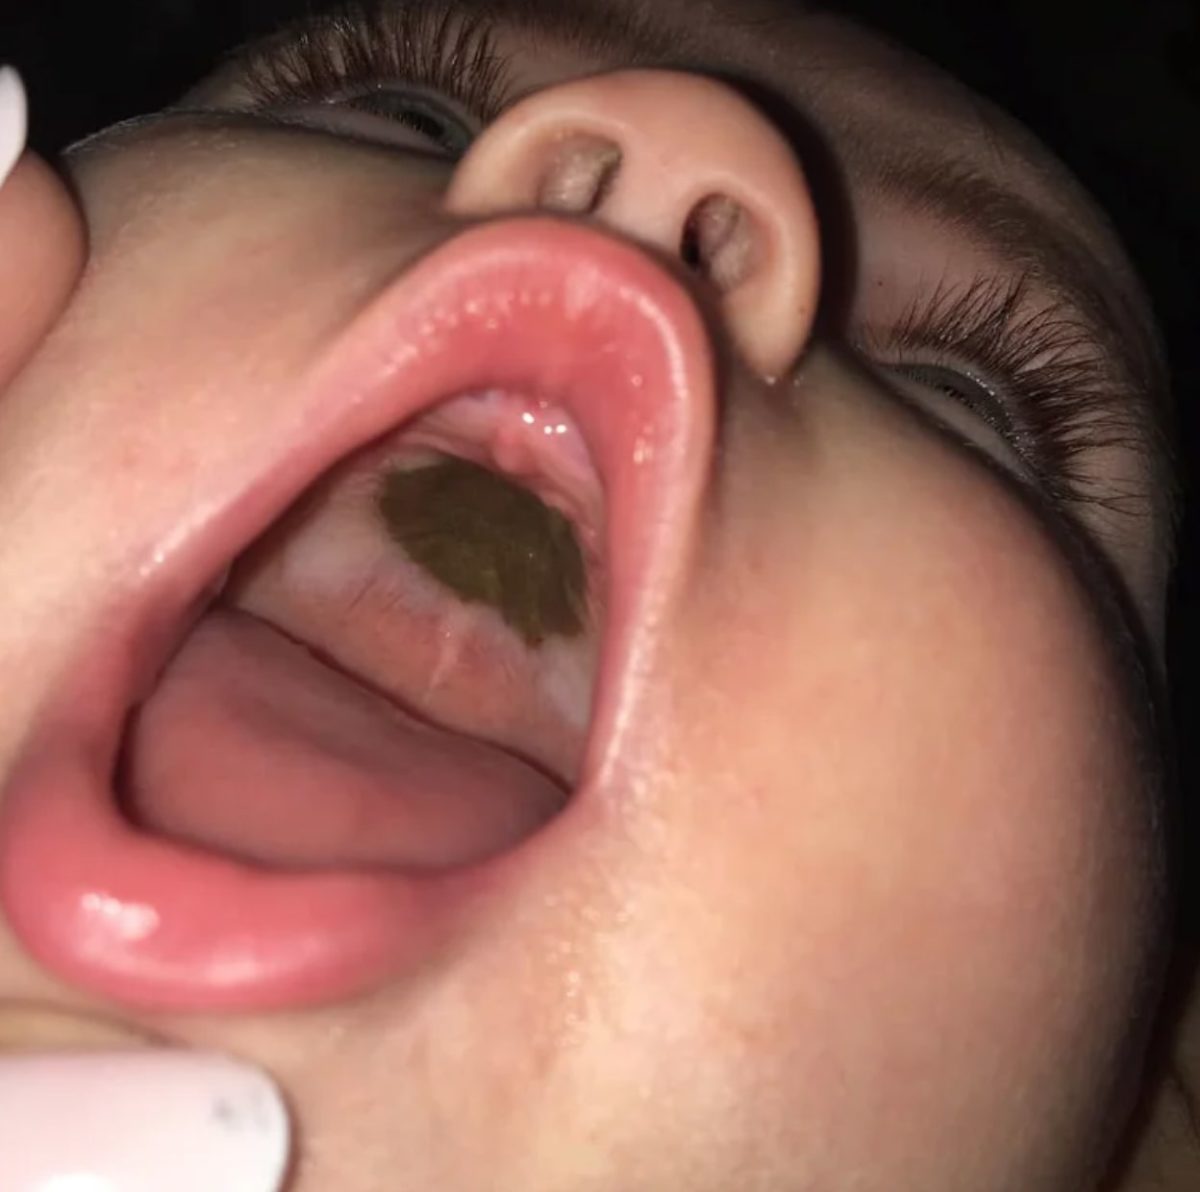 mom stumped by mysterious mark in daughter's mouth